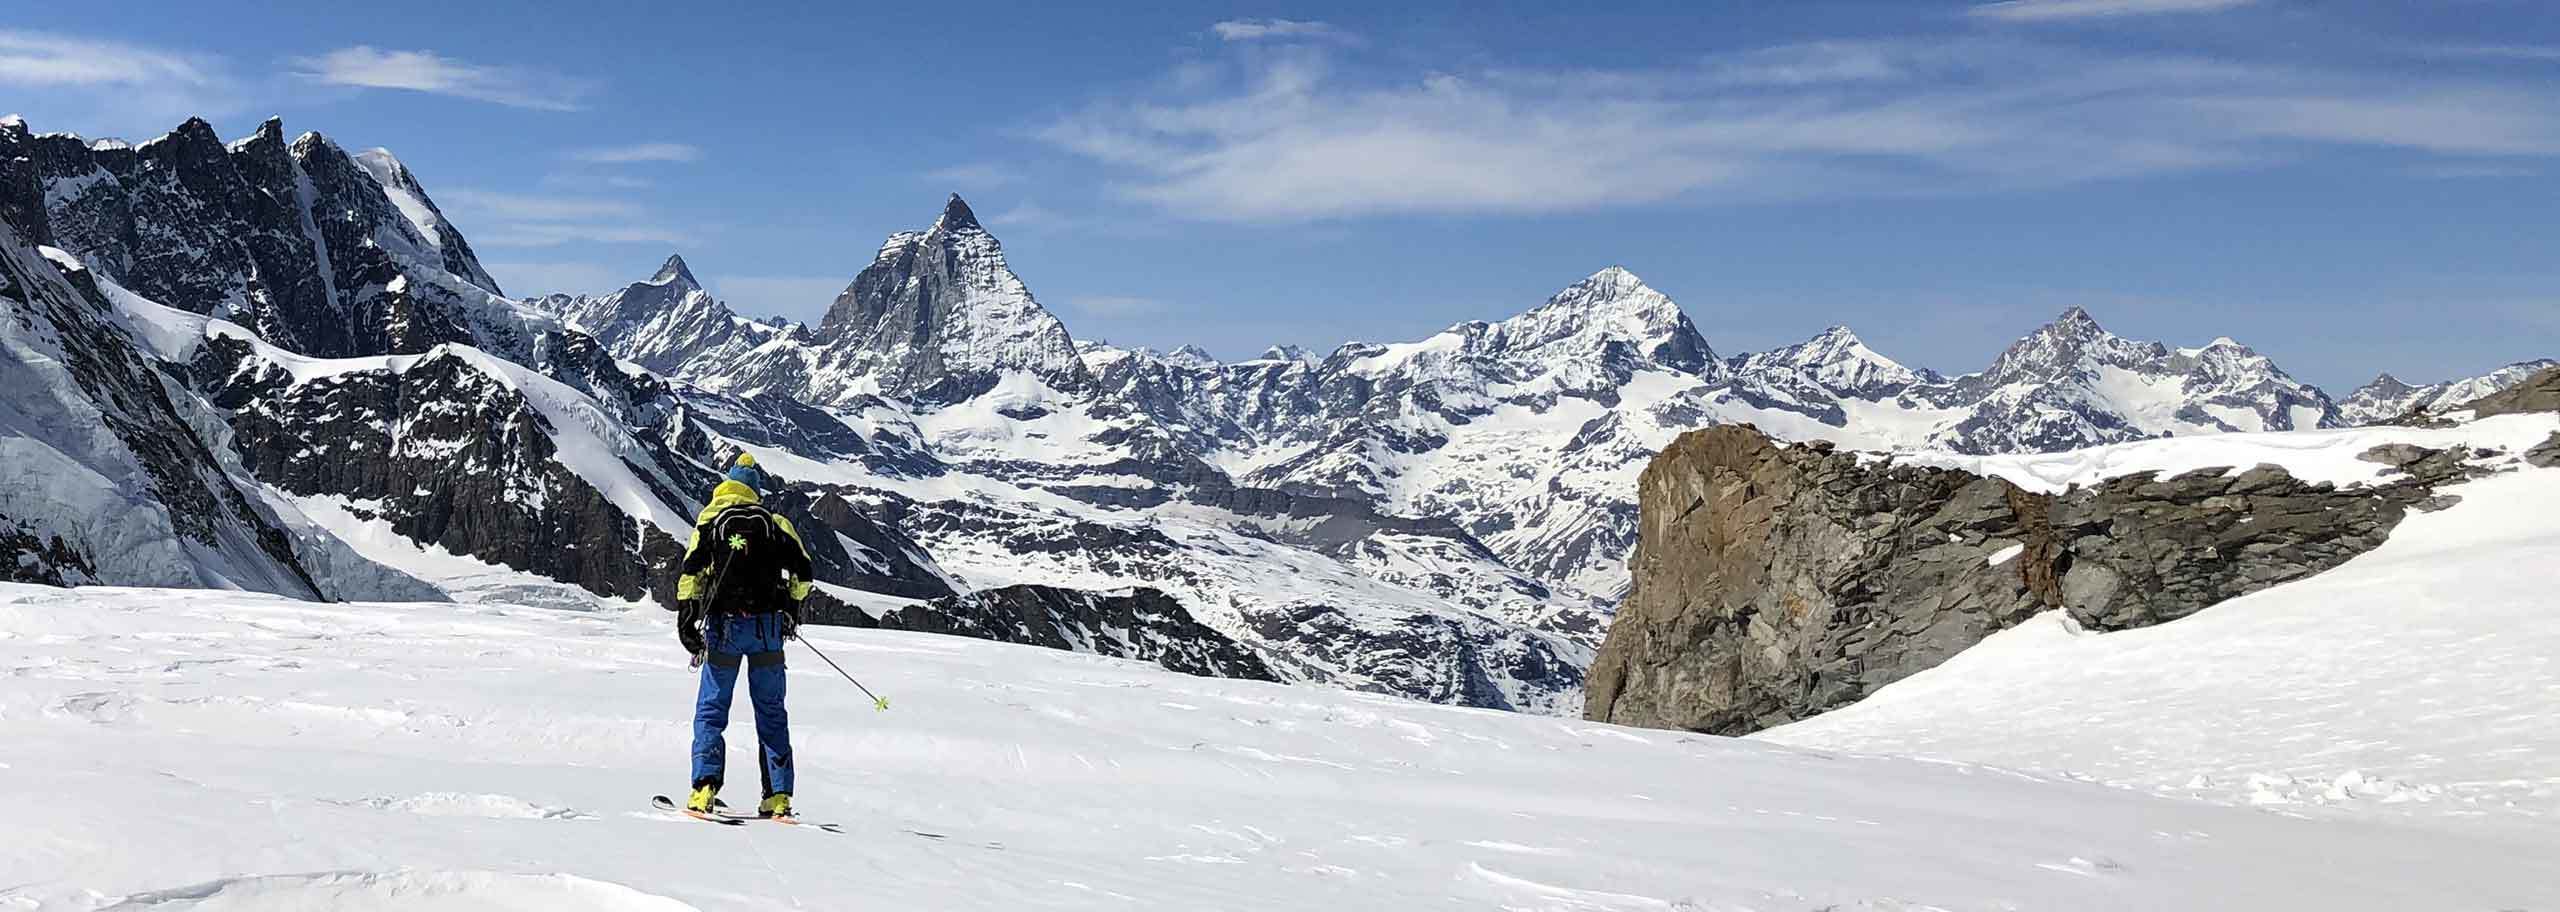 Ski Mountaineering with Mountain Guide in Cervinia, Matterhorn